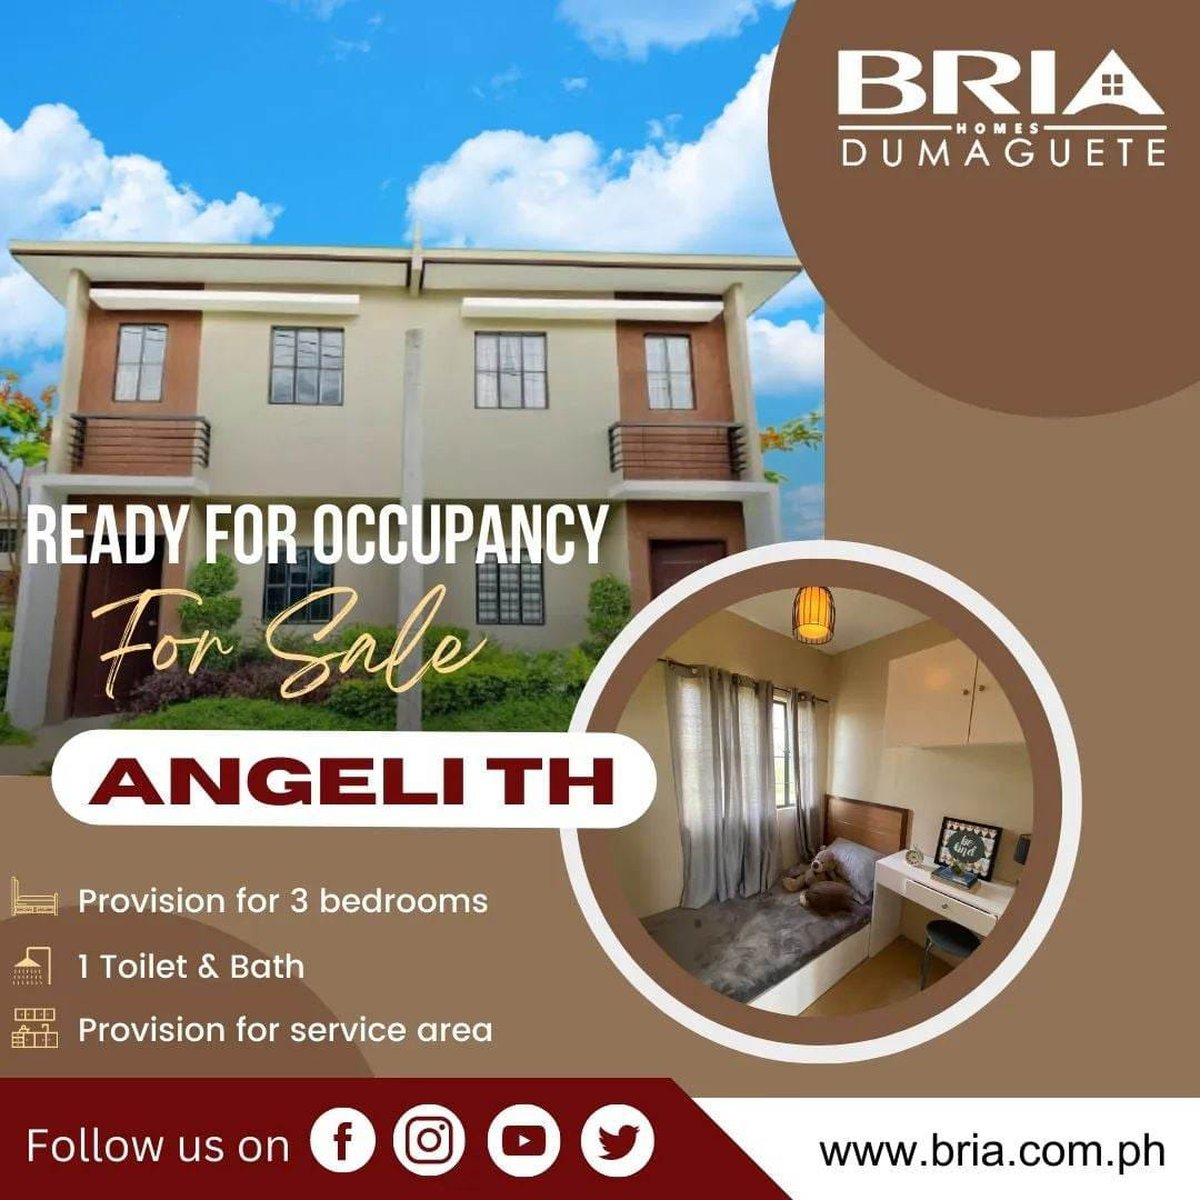 Bria Homes Dumaguete RFO Units @ Discounted Price